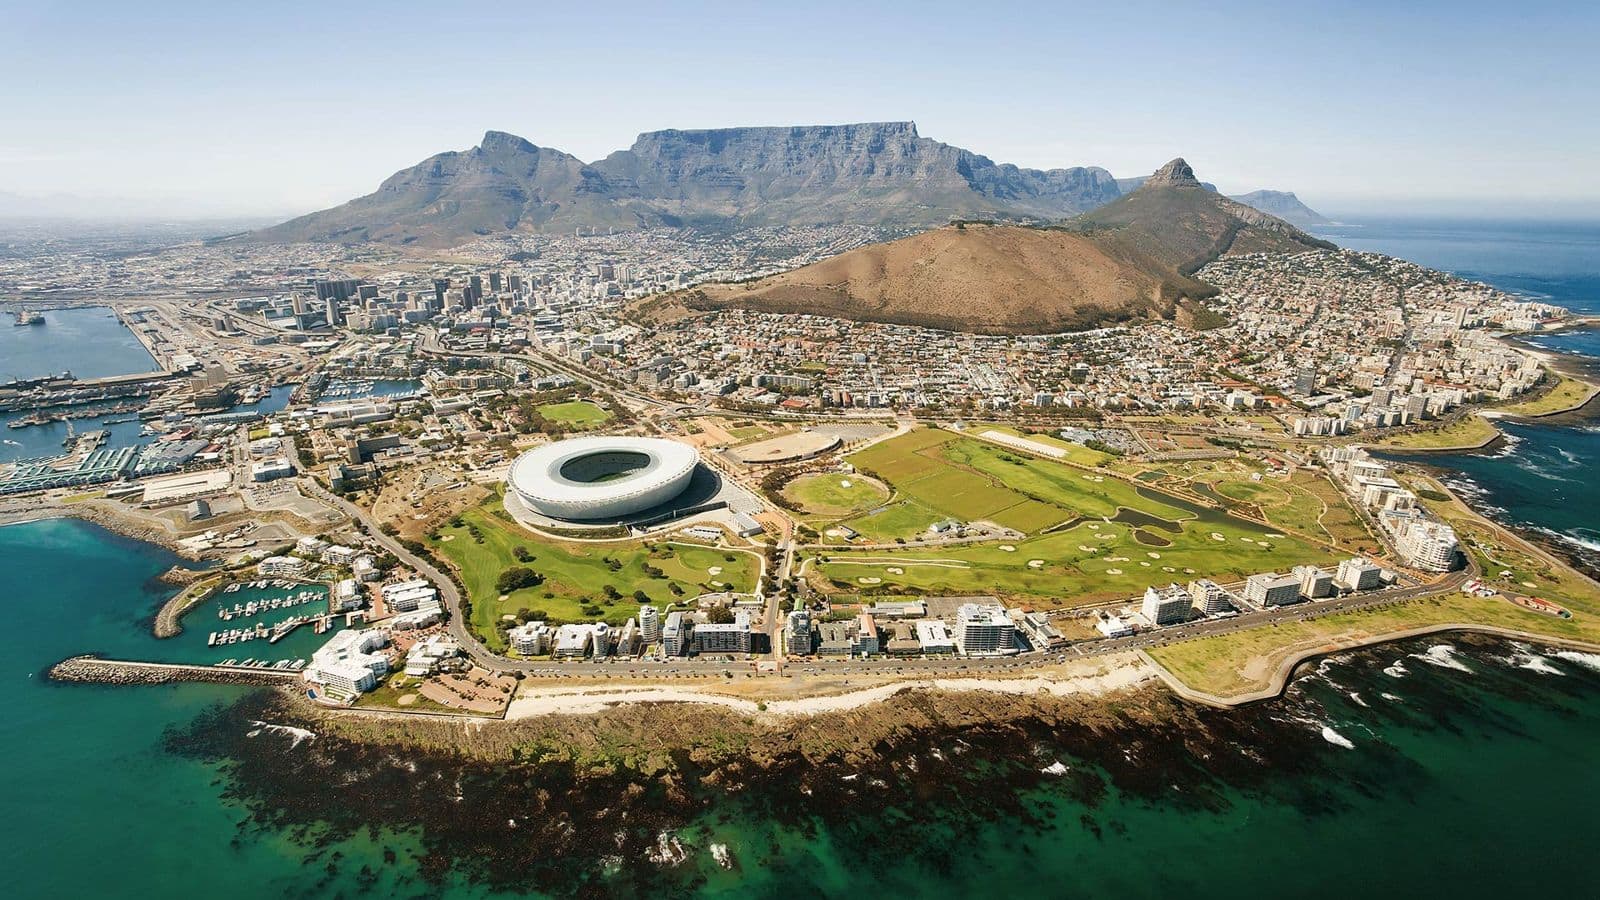 Discover Cape Peninsula's coastal charm with this travel guide